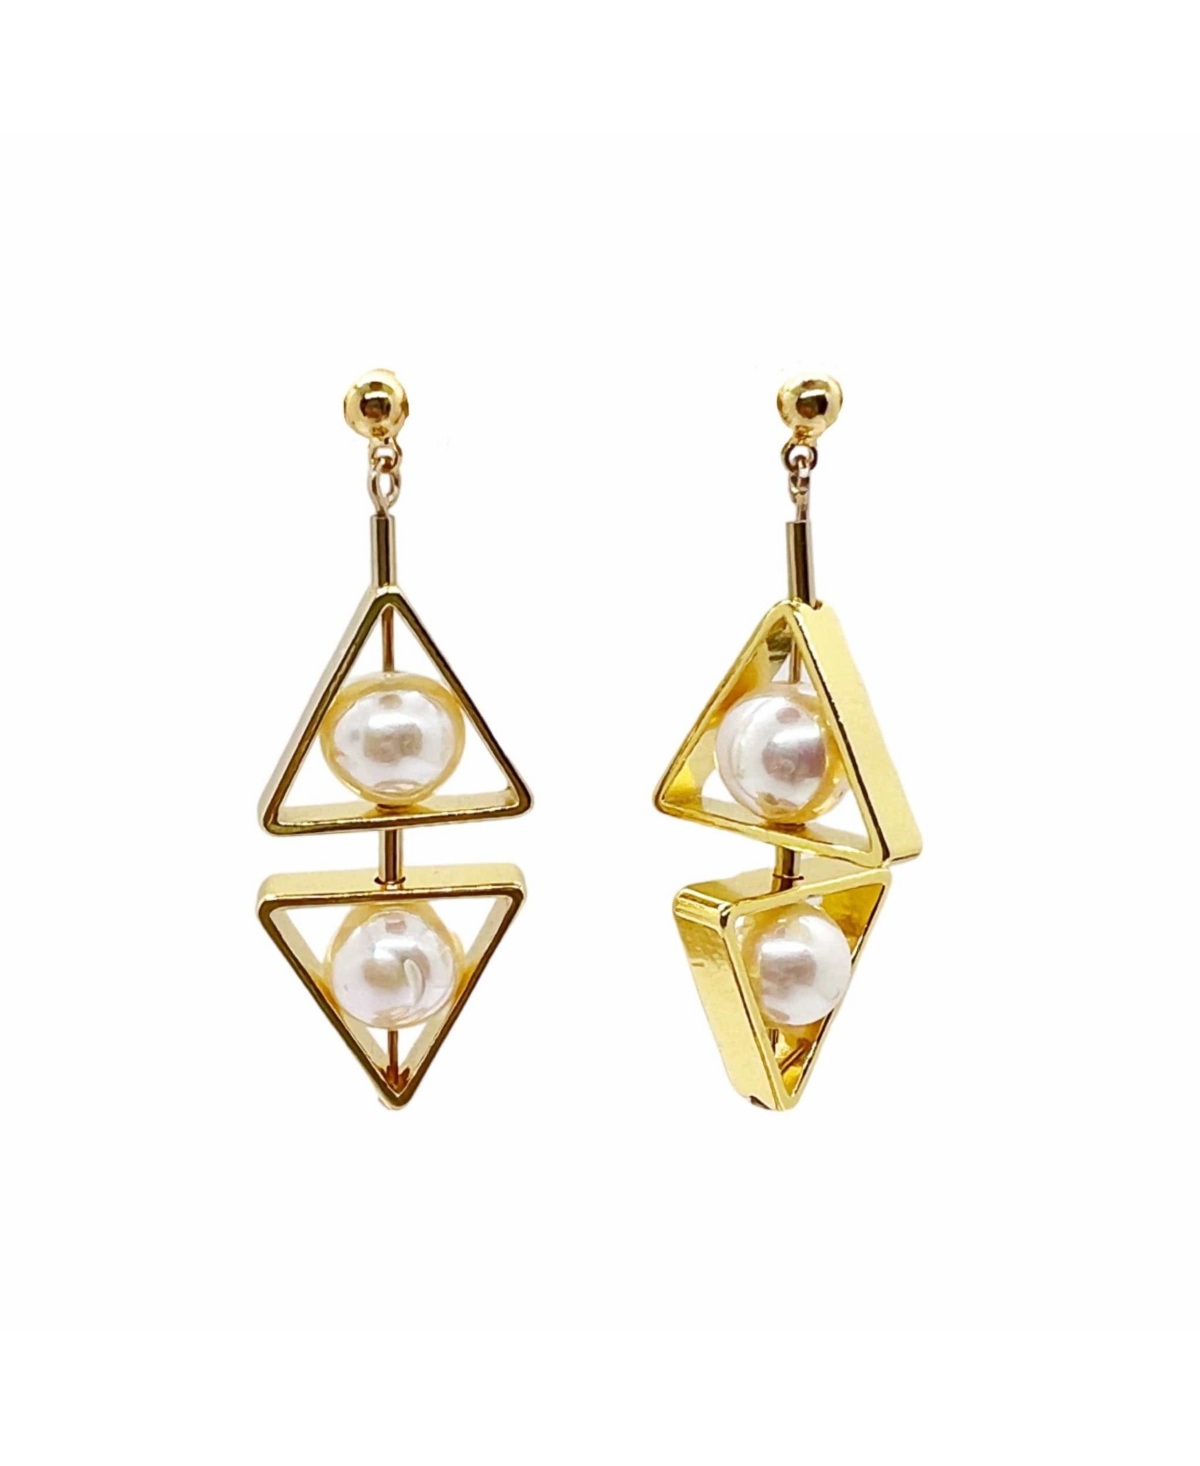 Double Triangle Pearl Earrings - Gold